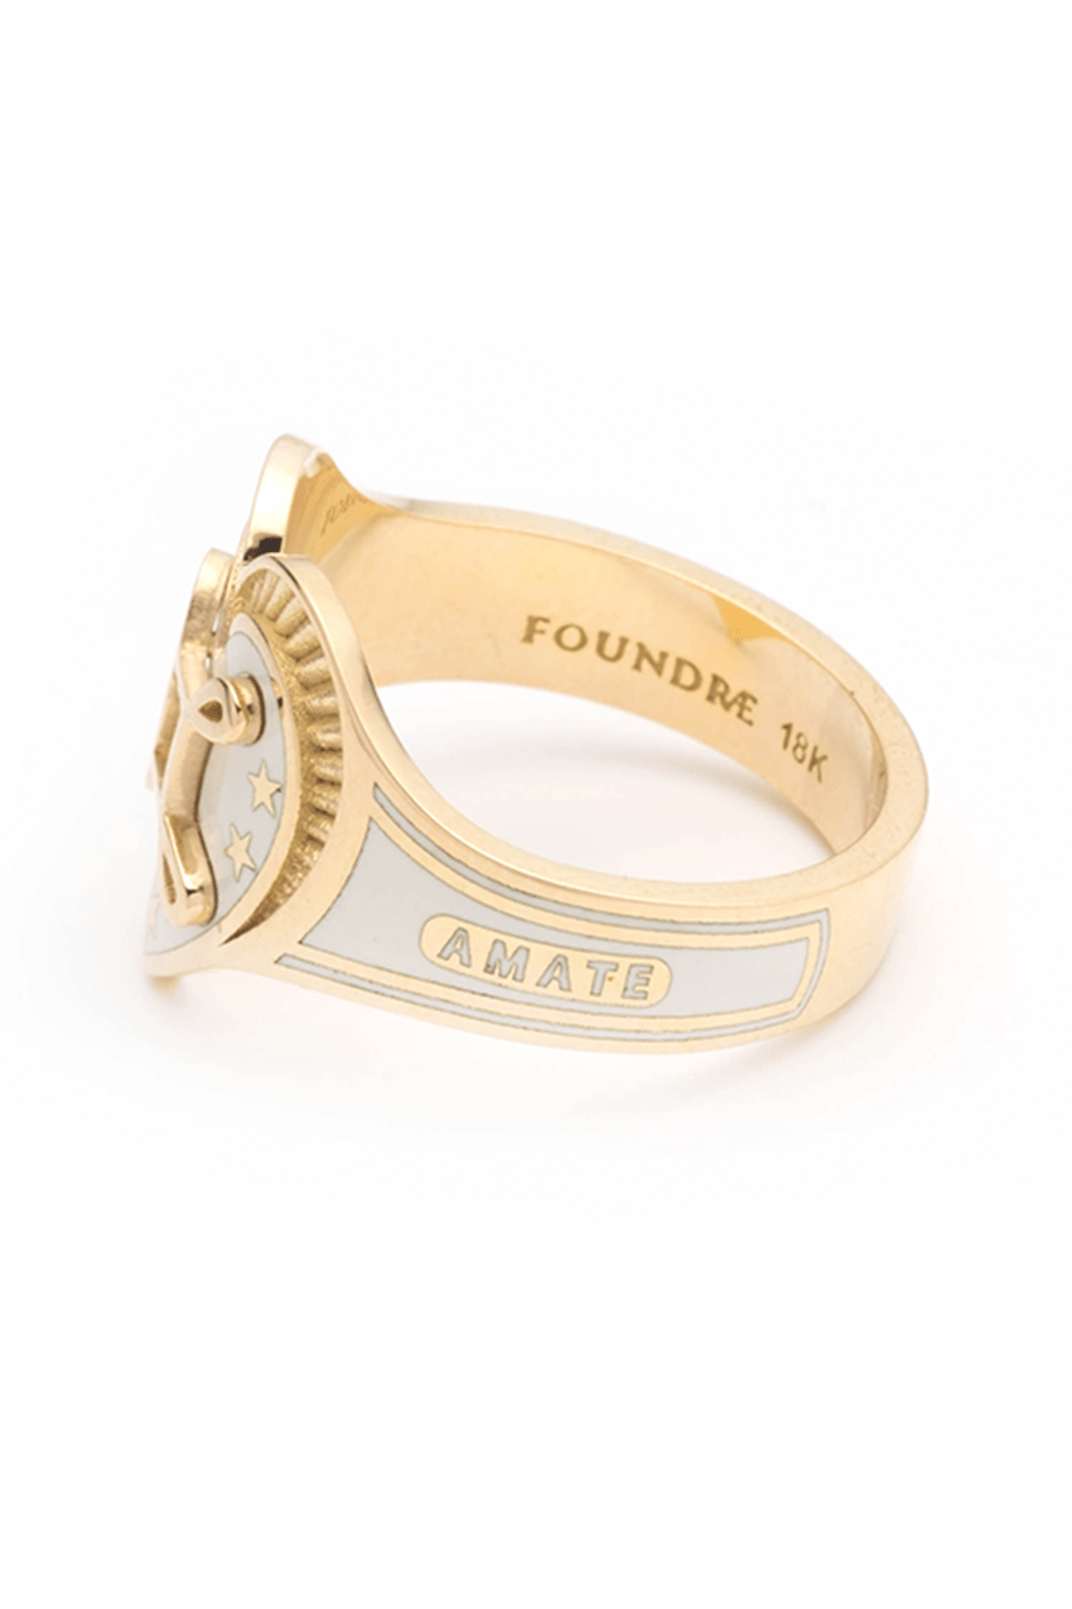 FOUNDRAE-True Love Cigar Band-YELLOW GOLD